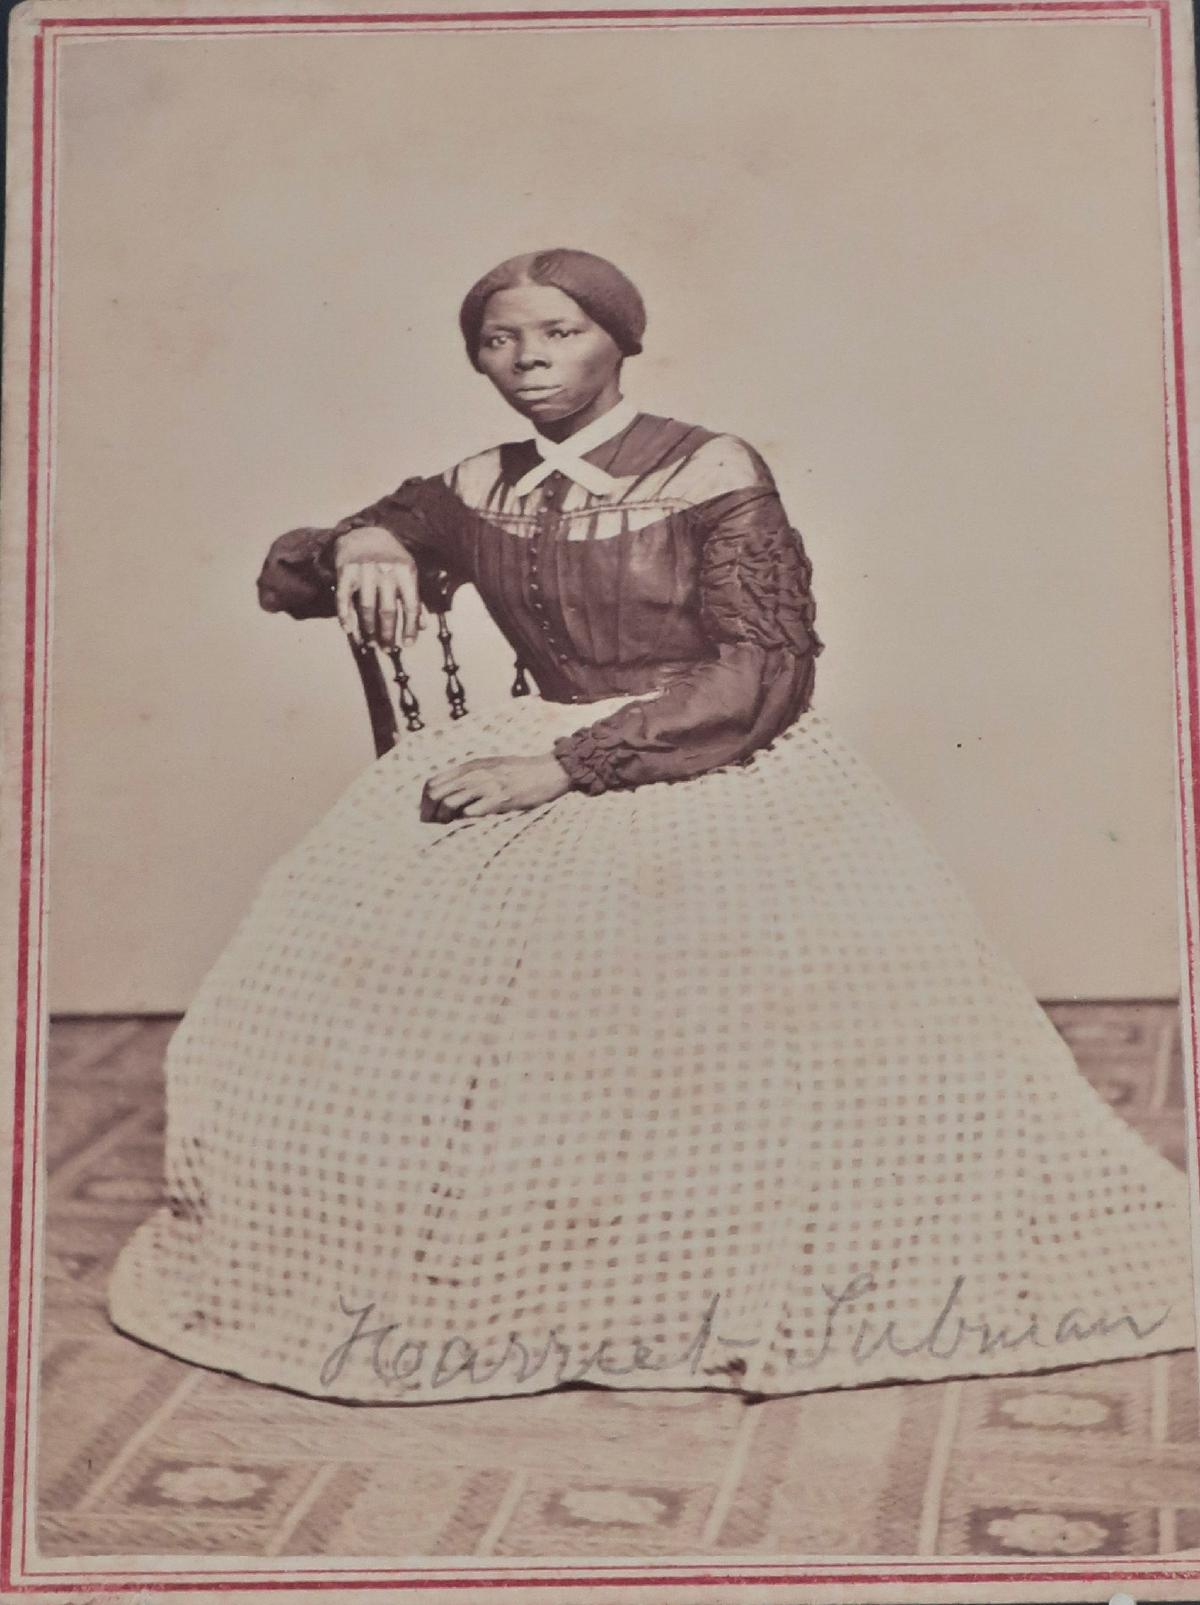 Images such as this one at the Harriet Tubman Museum in Cape May, New Jersey, help tell the story of the abolitionist. (Photo courtesy of Victor Block)